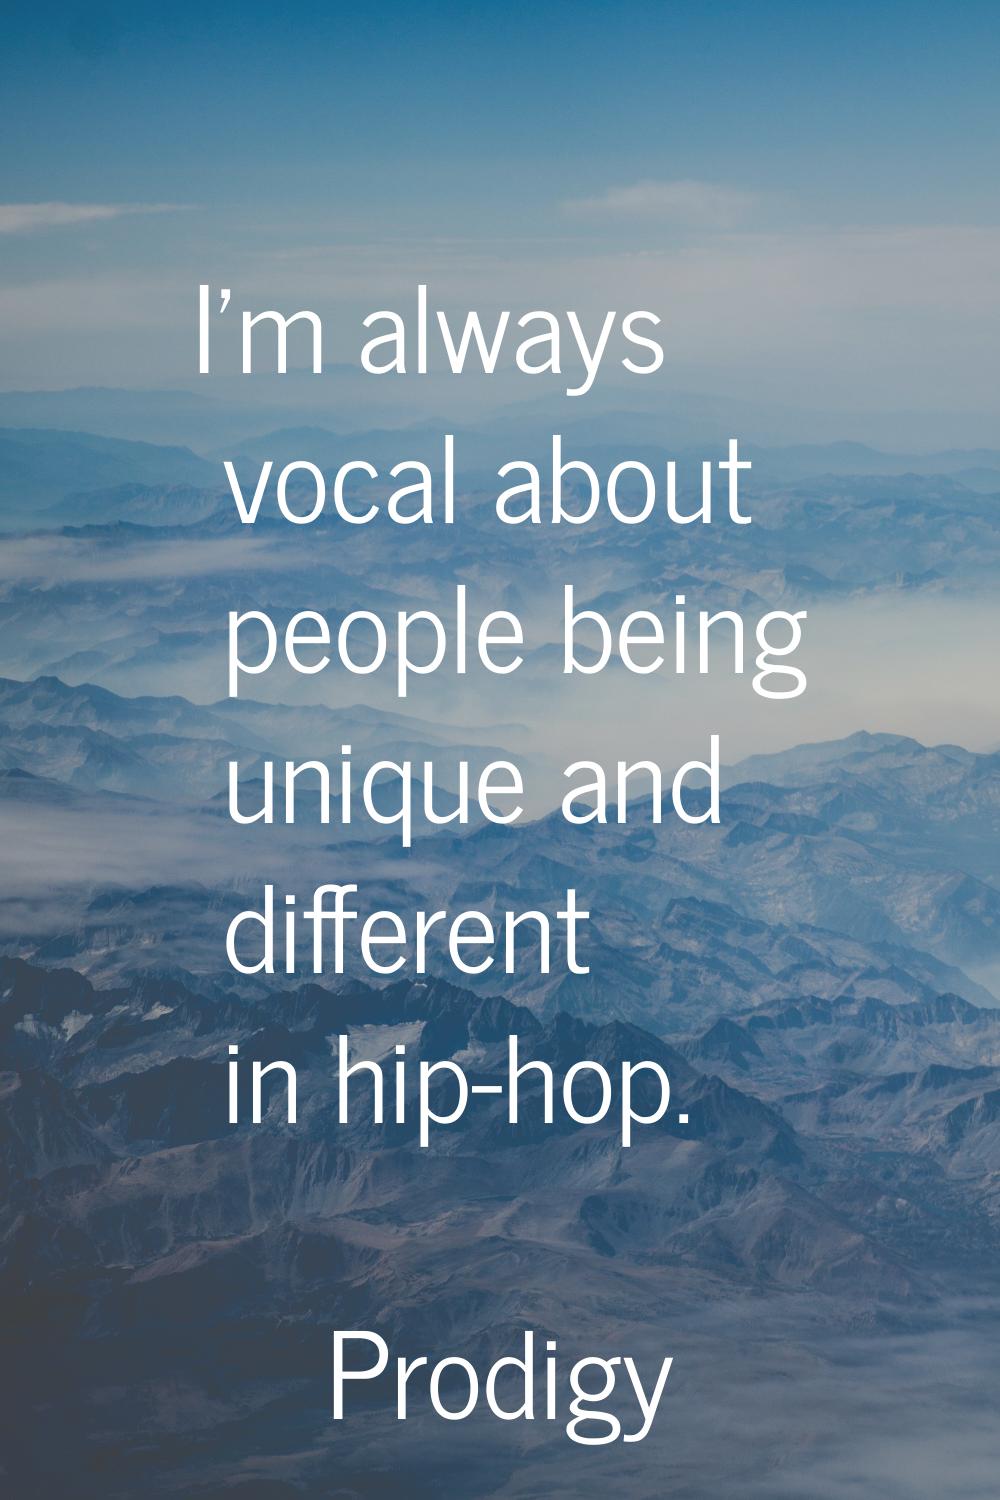 I'm always vocal about people being unique and different in hip-hop.